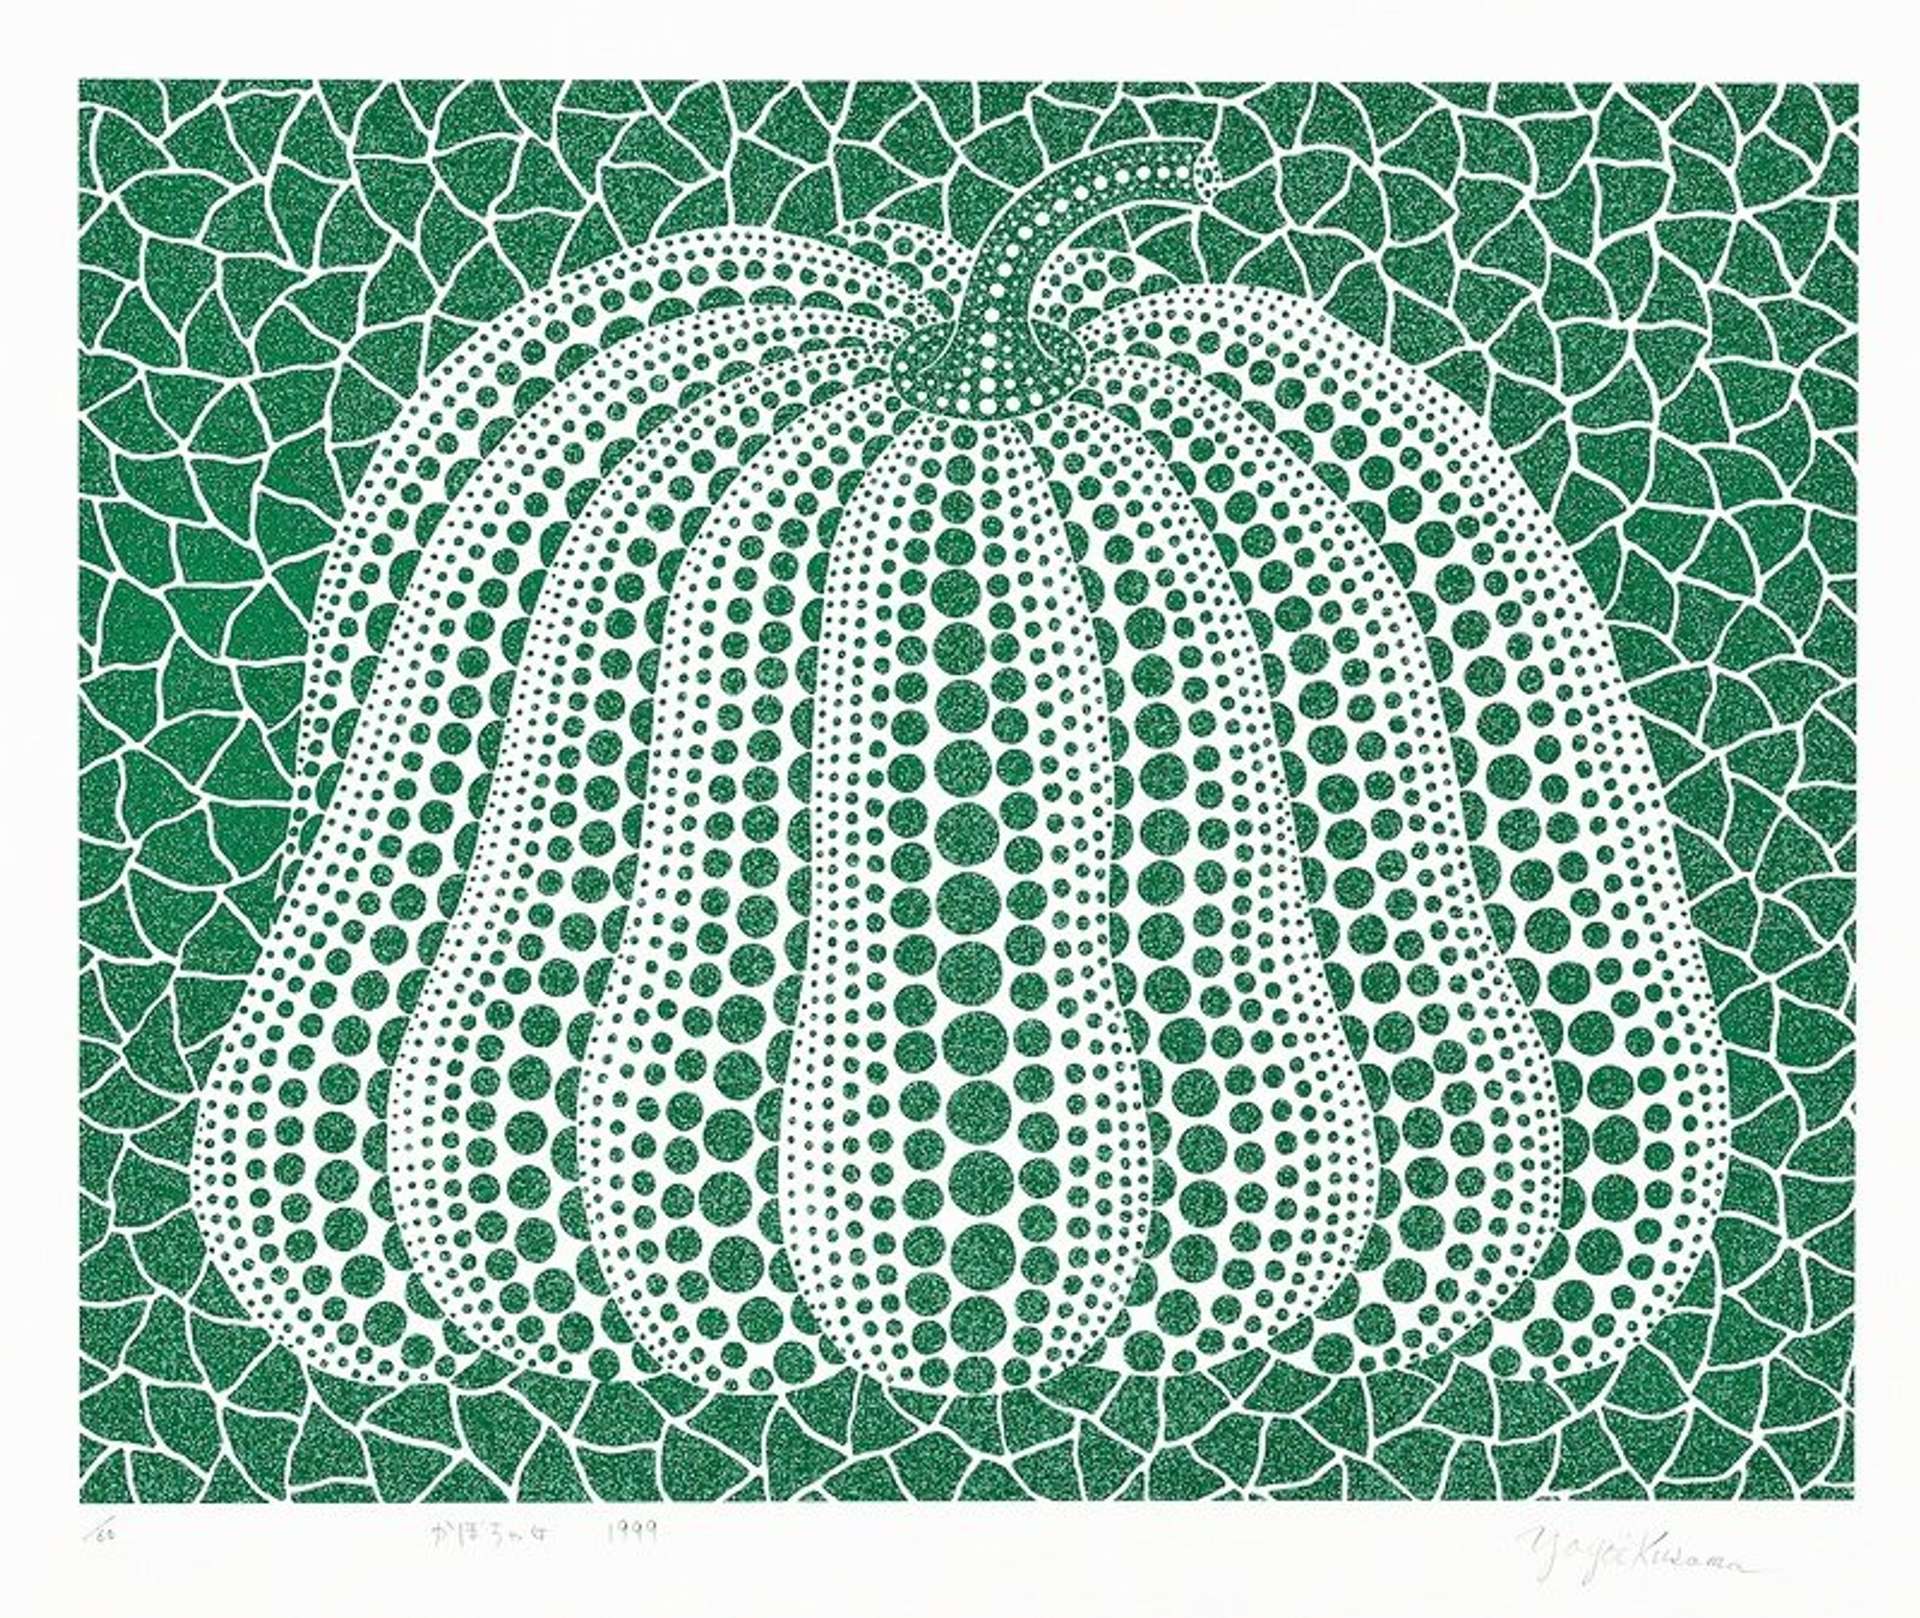 Yayoi Kusama's Pumpkin (green). A screenprint of a pumpkin created out of a pattern of green and white polka dots against a geometric patterned green background.